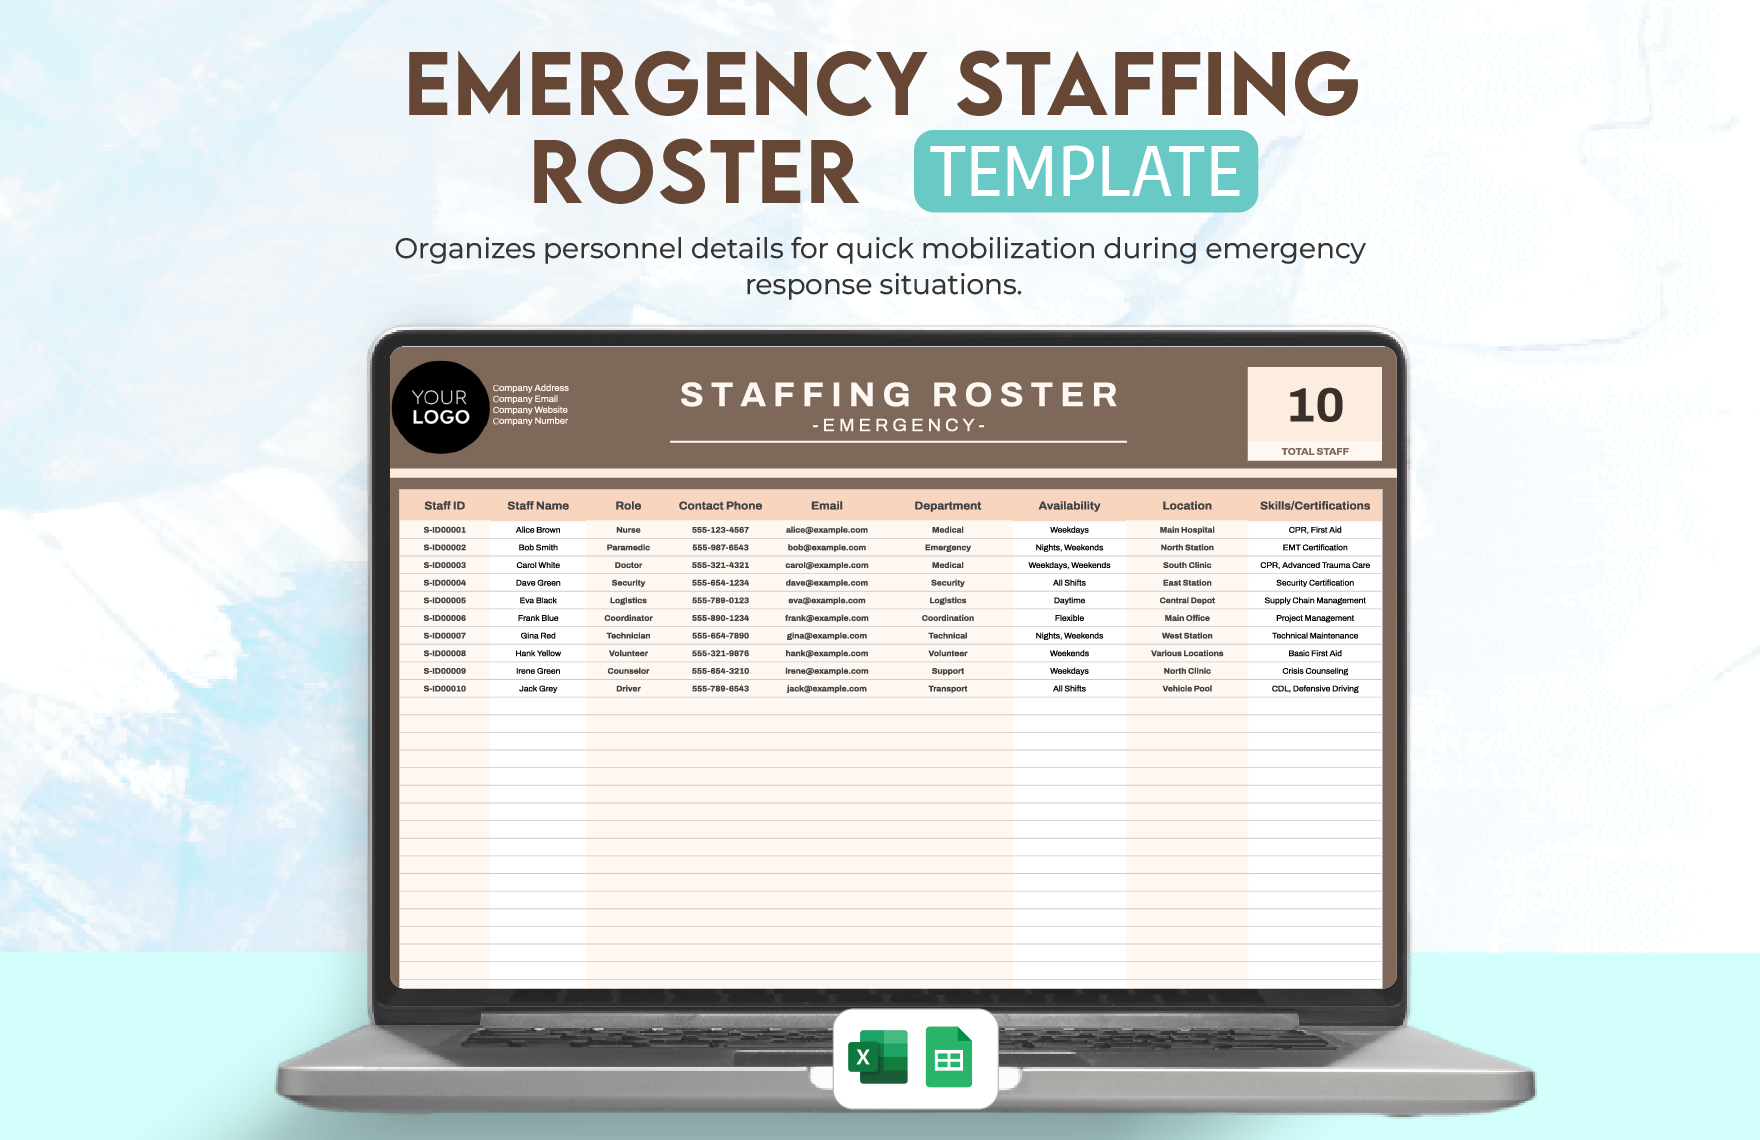 Emergency Staffing Roster Template in Excel, Google Sheets